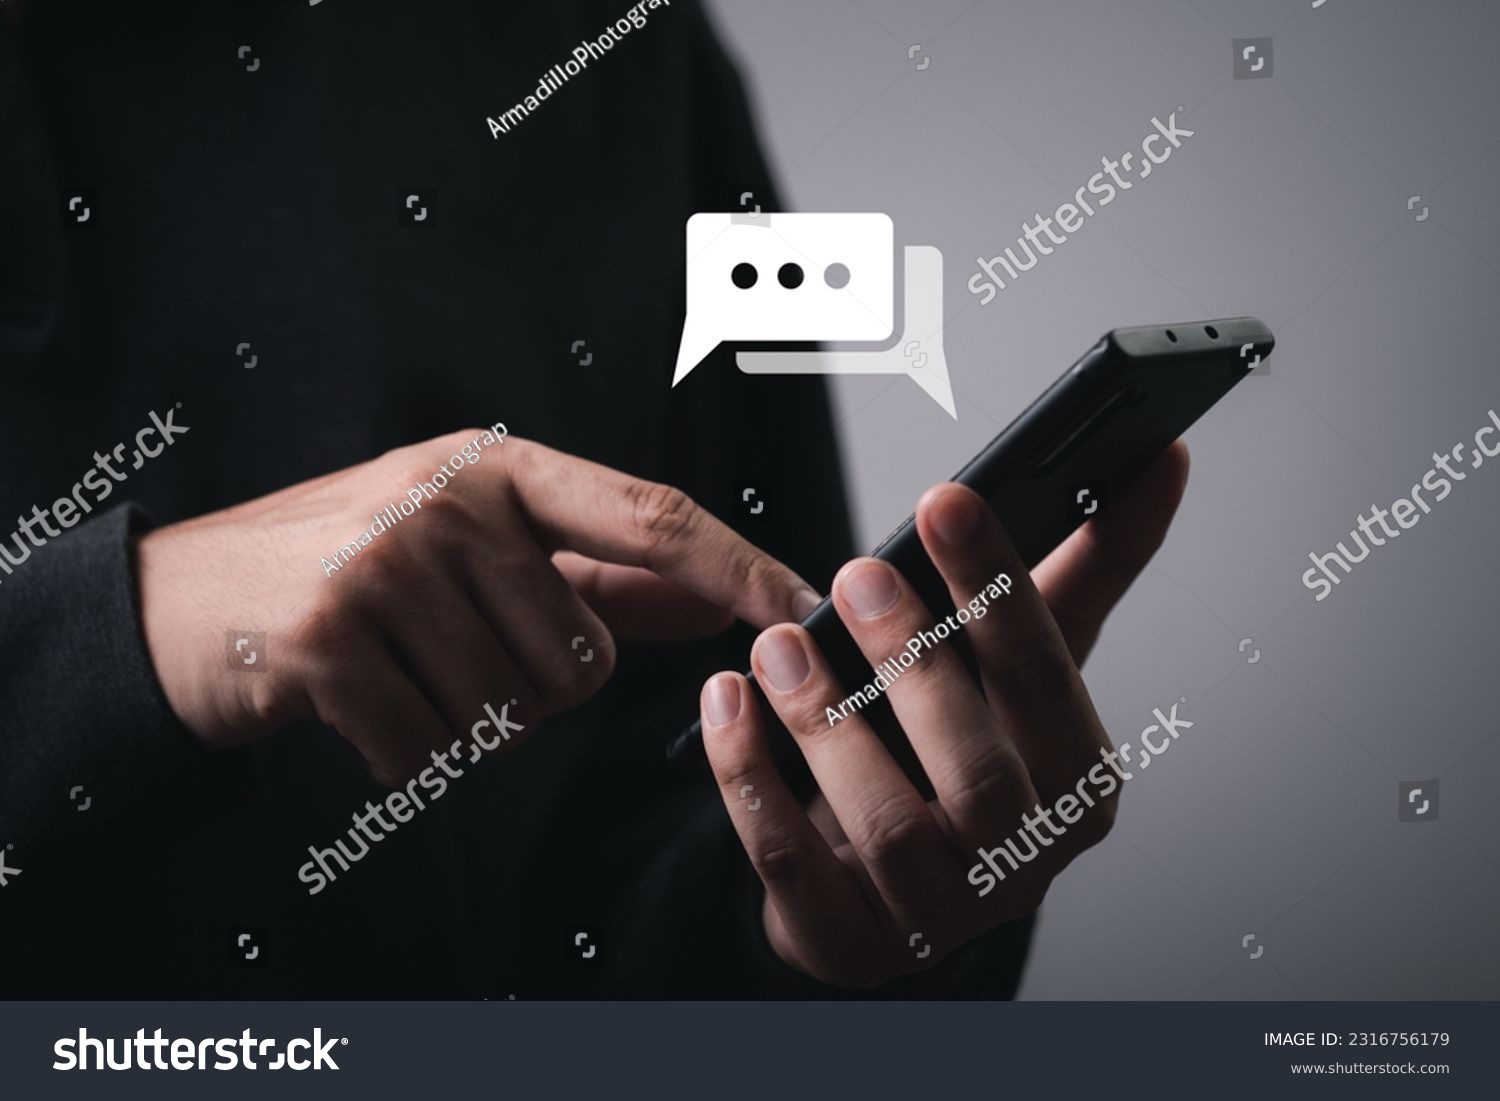 Man using smartphone typing Live chat chatting and social network concepts, chatting conversation working on mobile phone in chat box icons pop up. Social media marketing technology concept. #2316756179